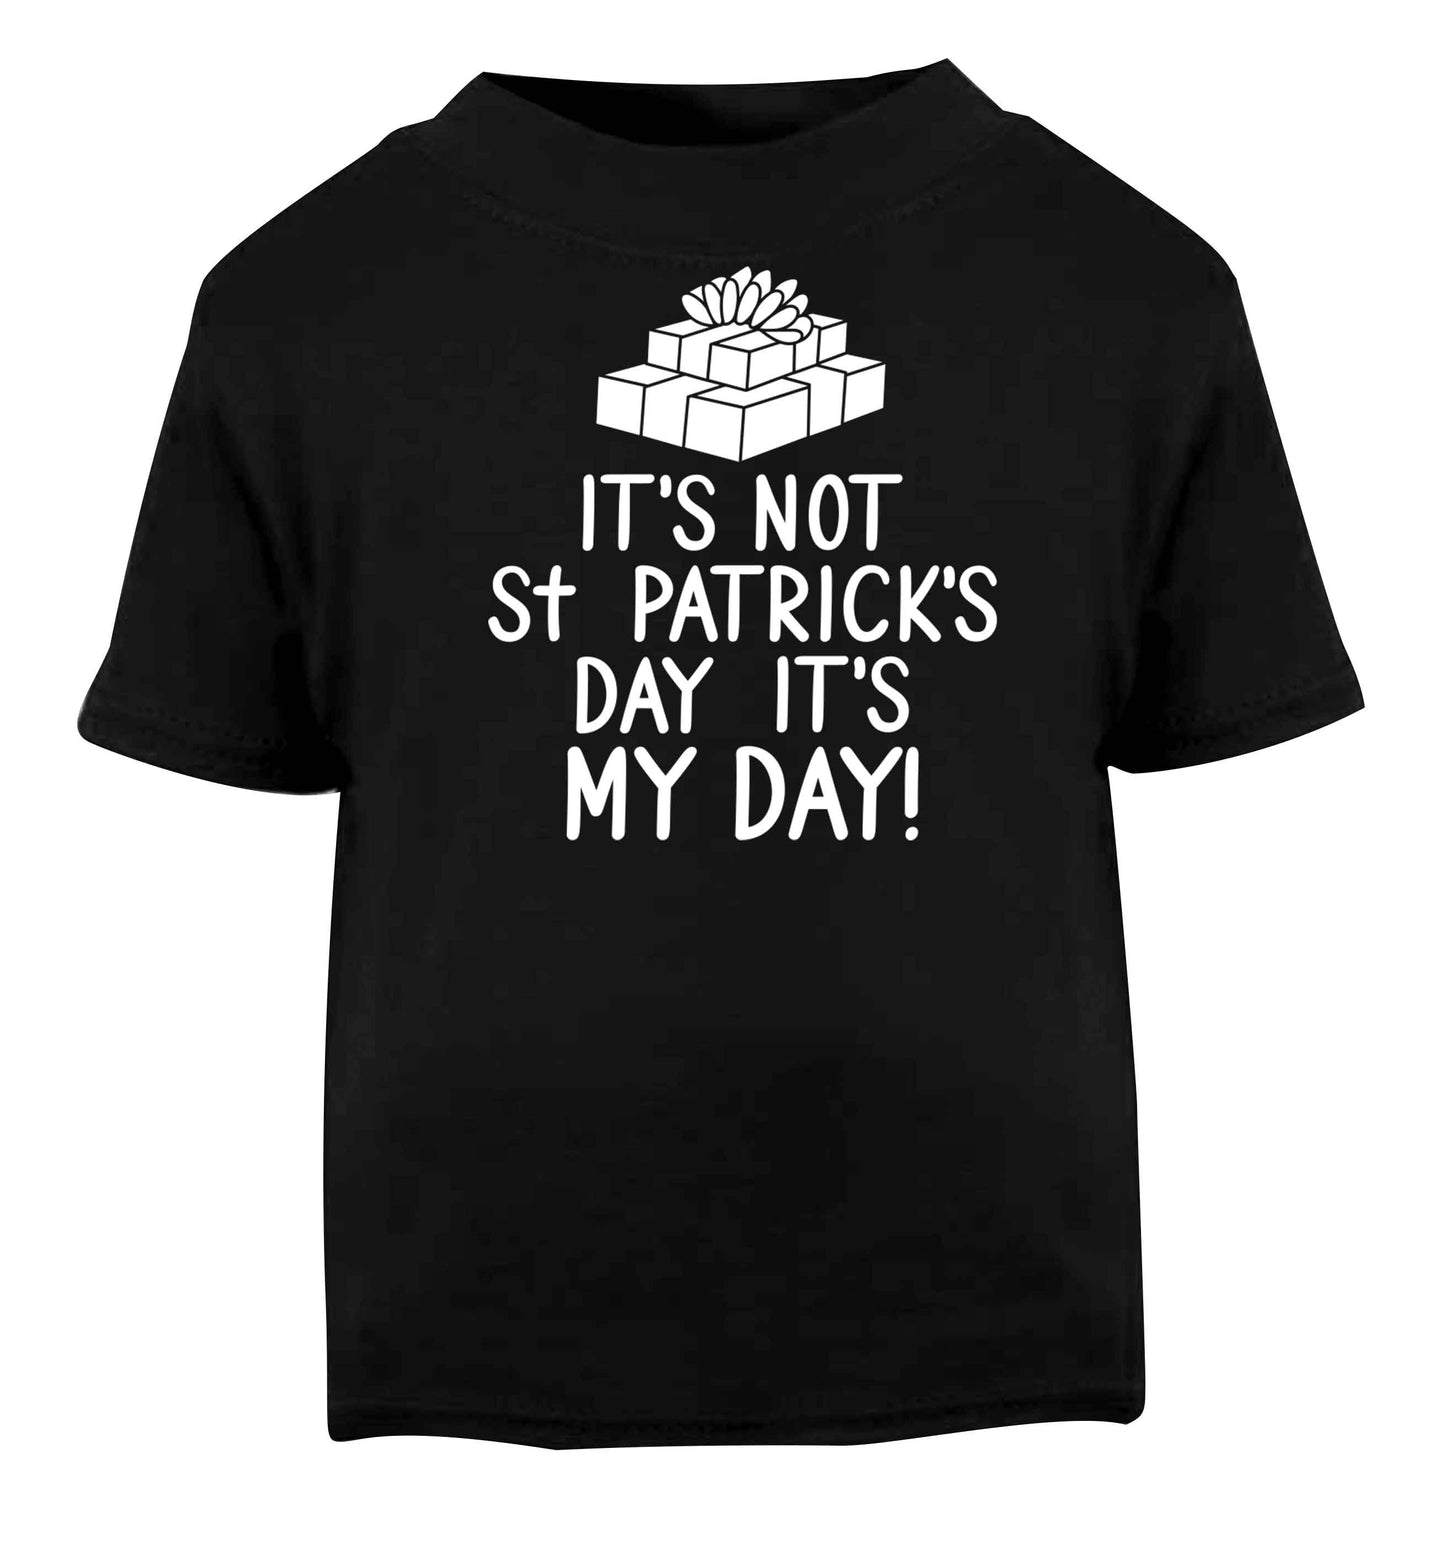 Funny gifts for your mum on mother's dayor her birthday! It's not St Patricks day it's my day Black baby toddler Tshirt 2 years